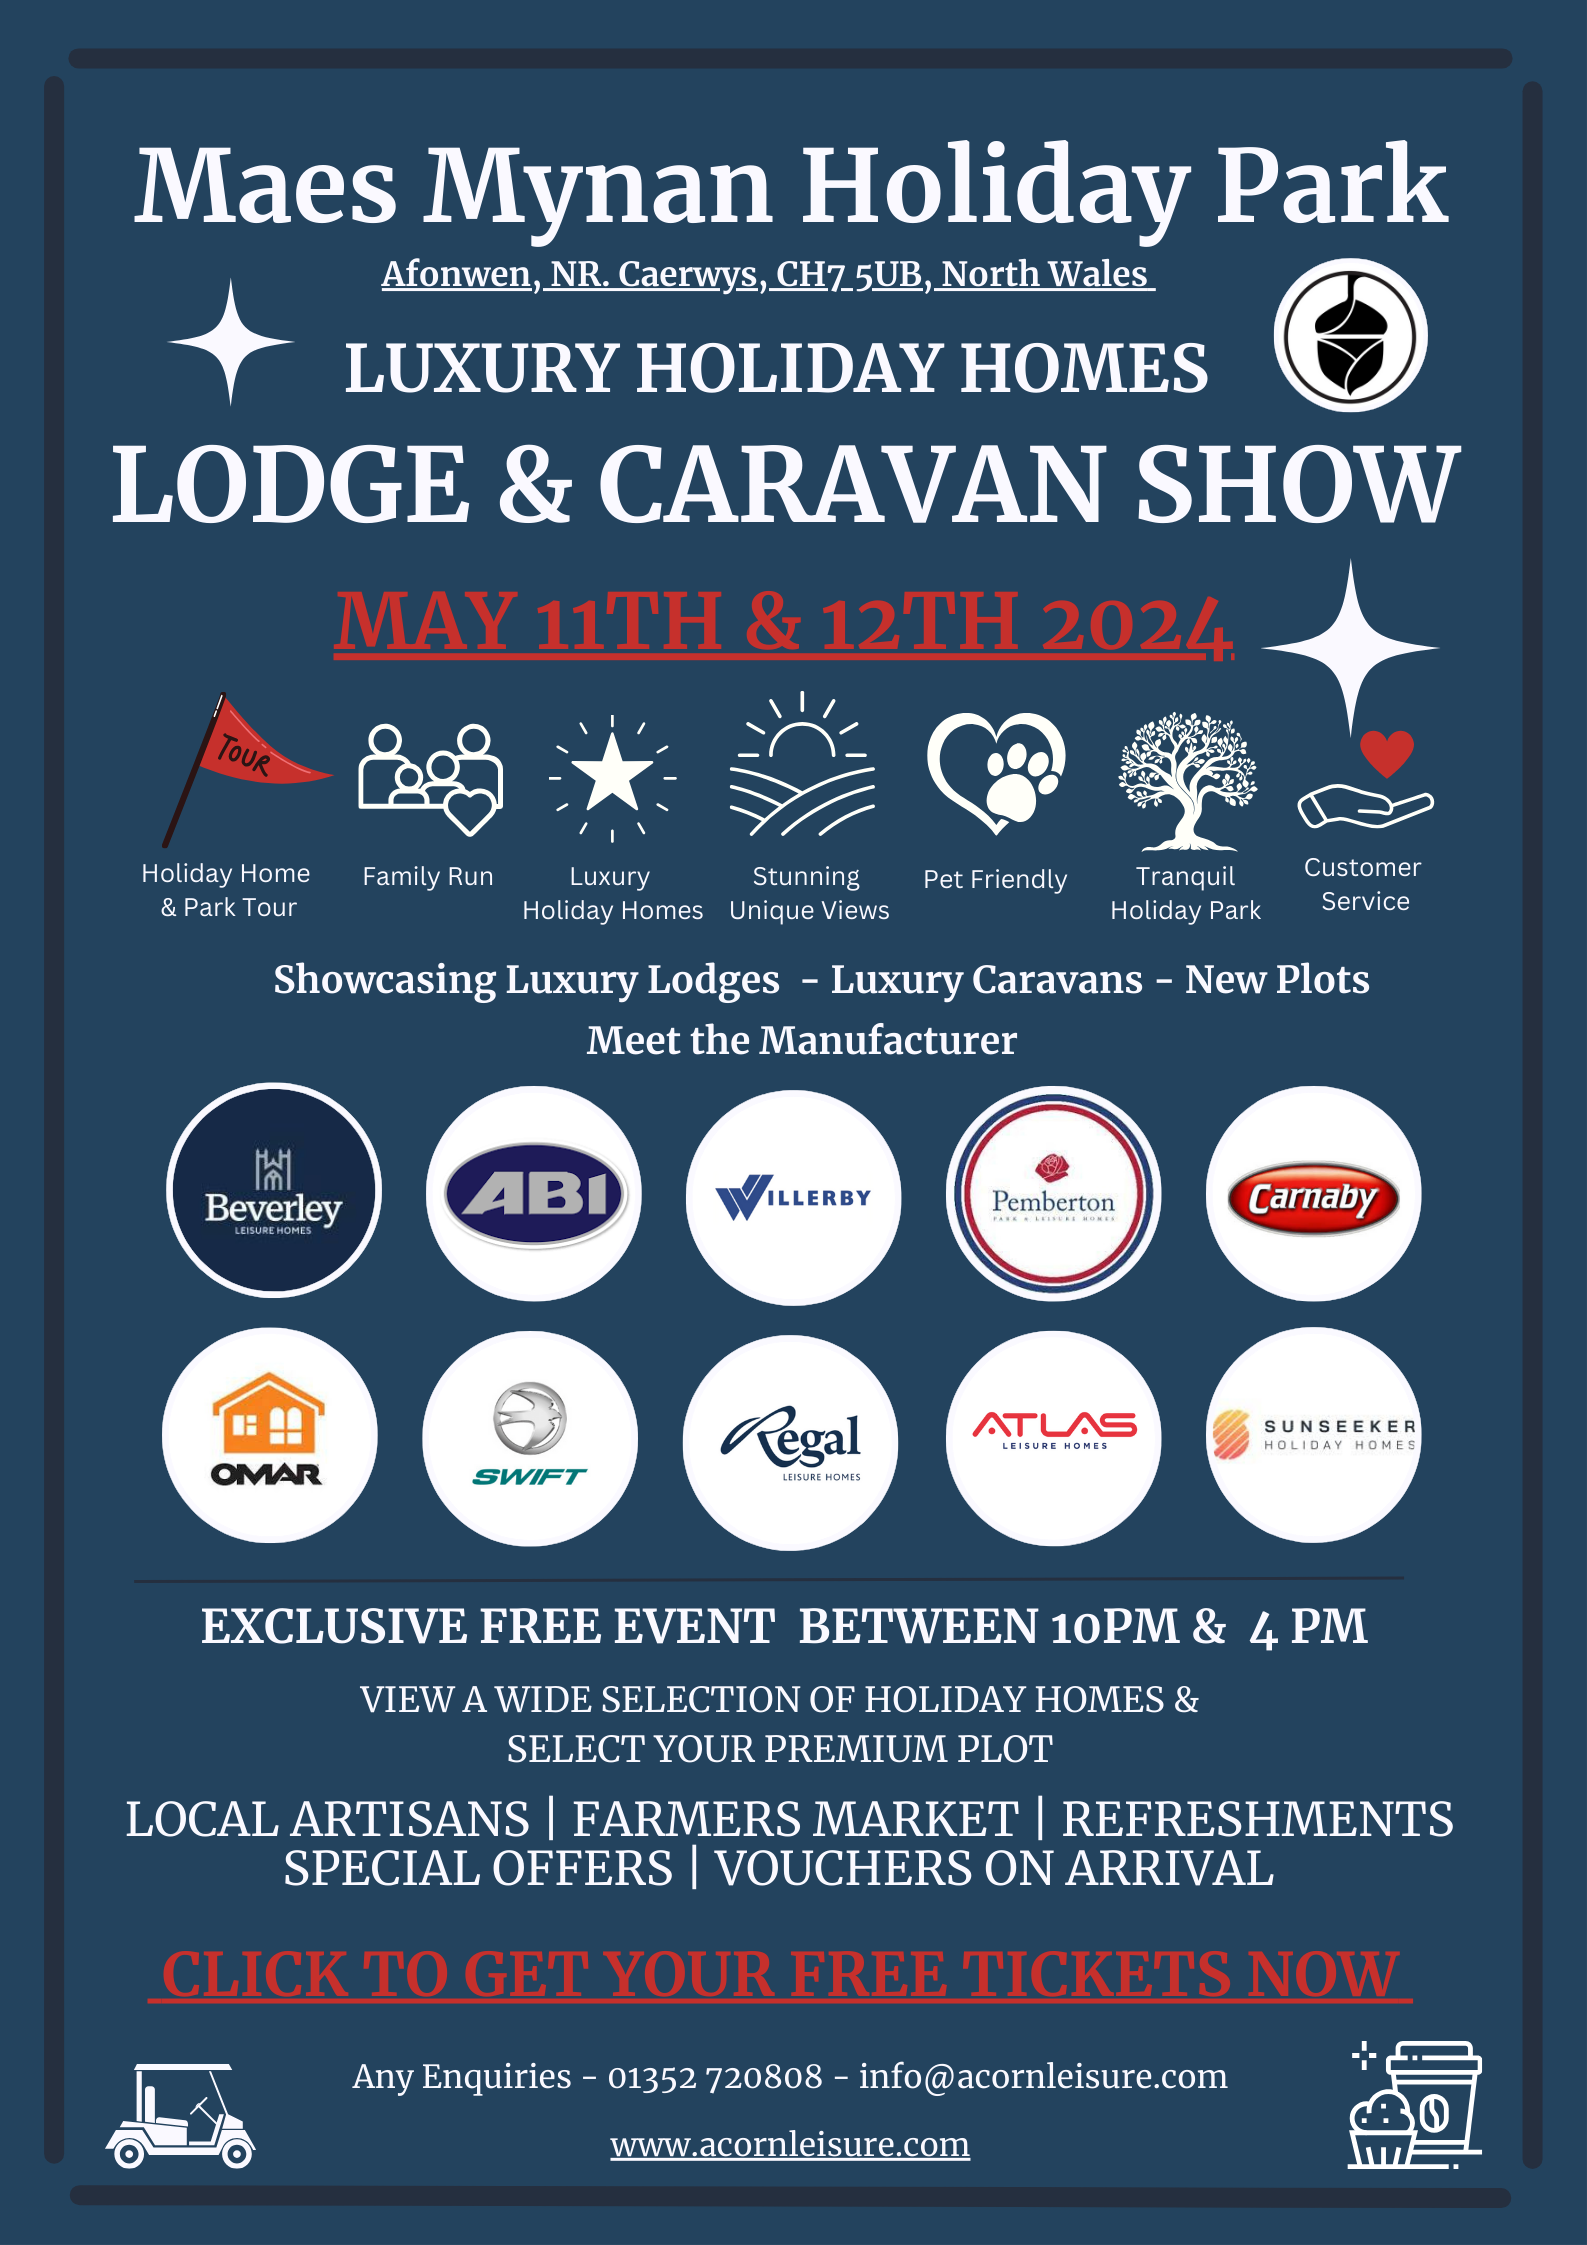 Caravan & Lodge Show | 11th & 12th May 2024 | Maes Mynan Holiday Park | Meet the manufacturer | Farmers Market | Free Event